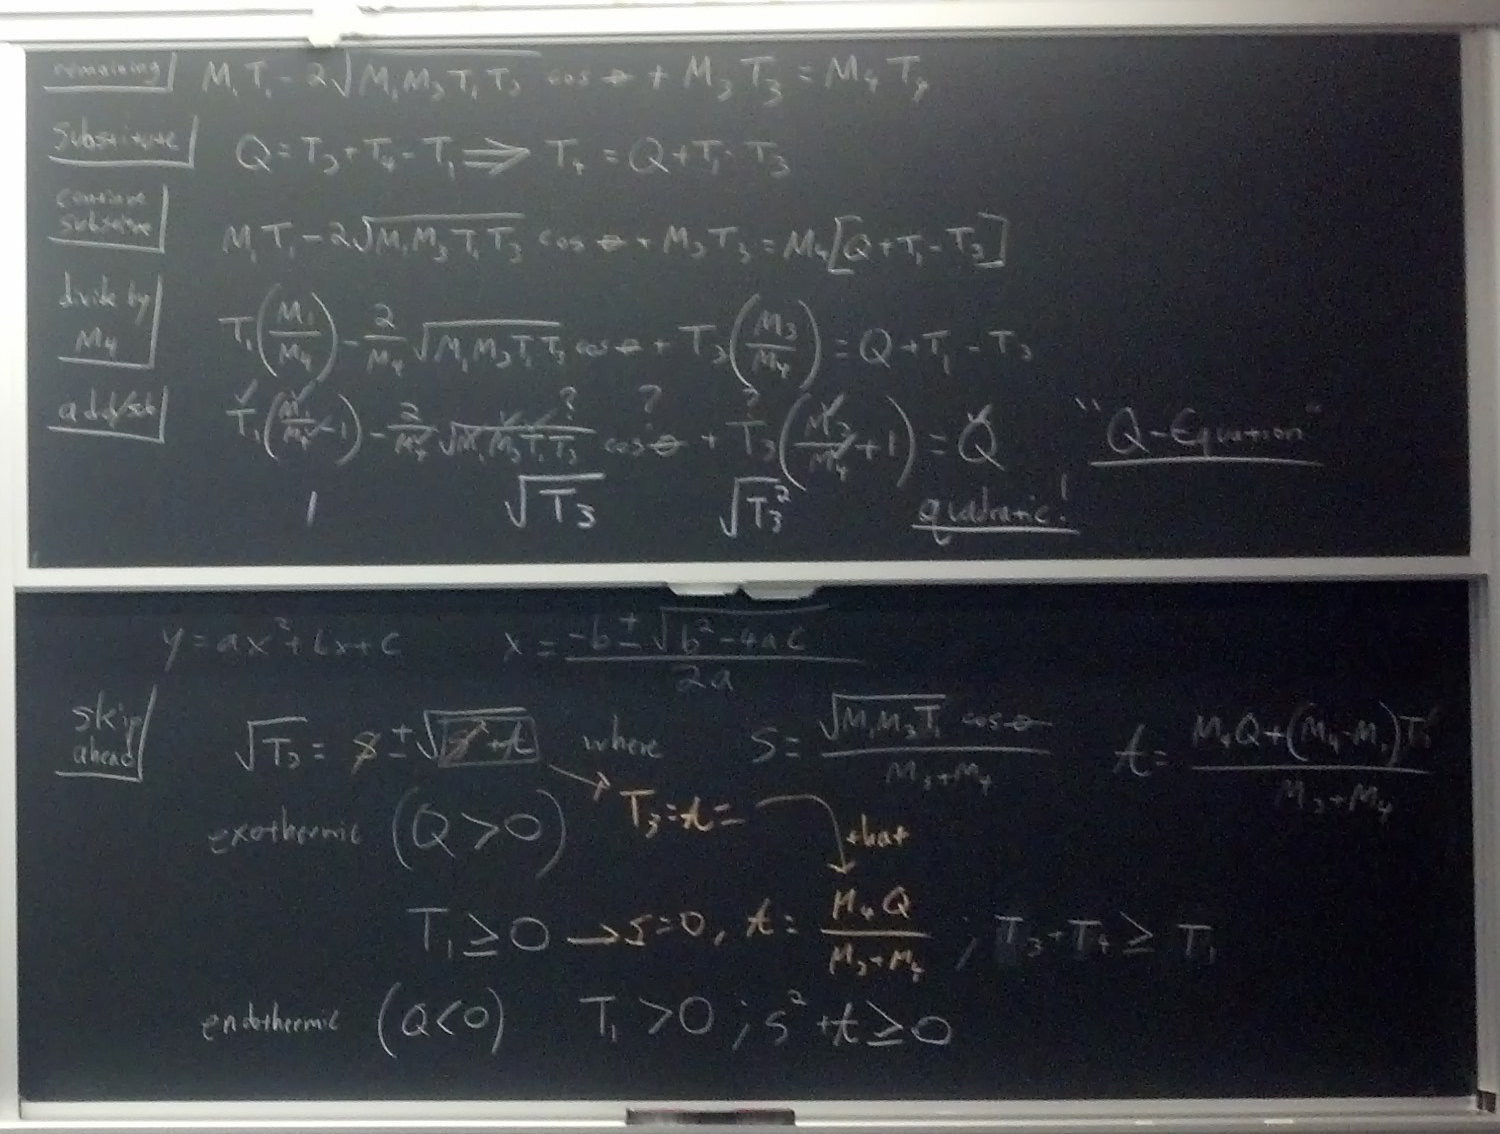 Nuclear reaction related equations on two blackboards.